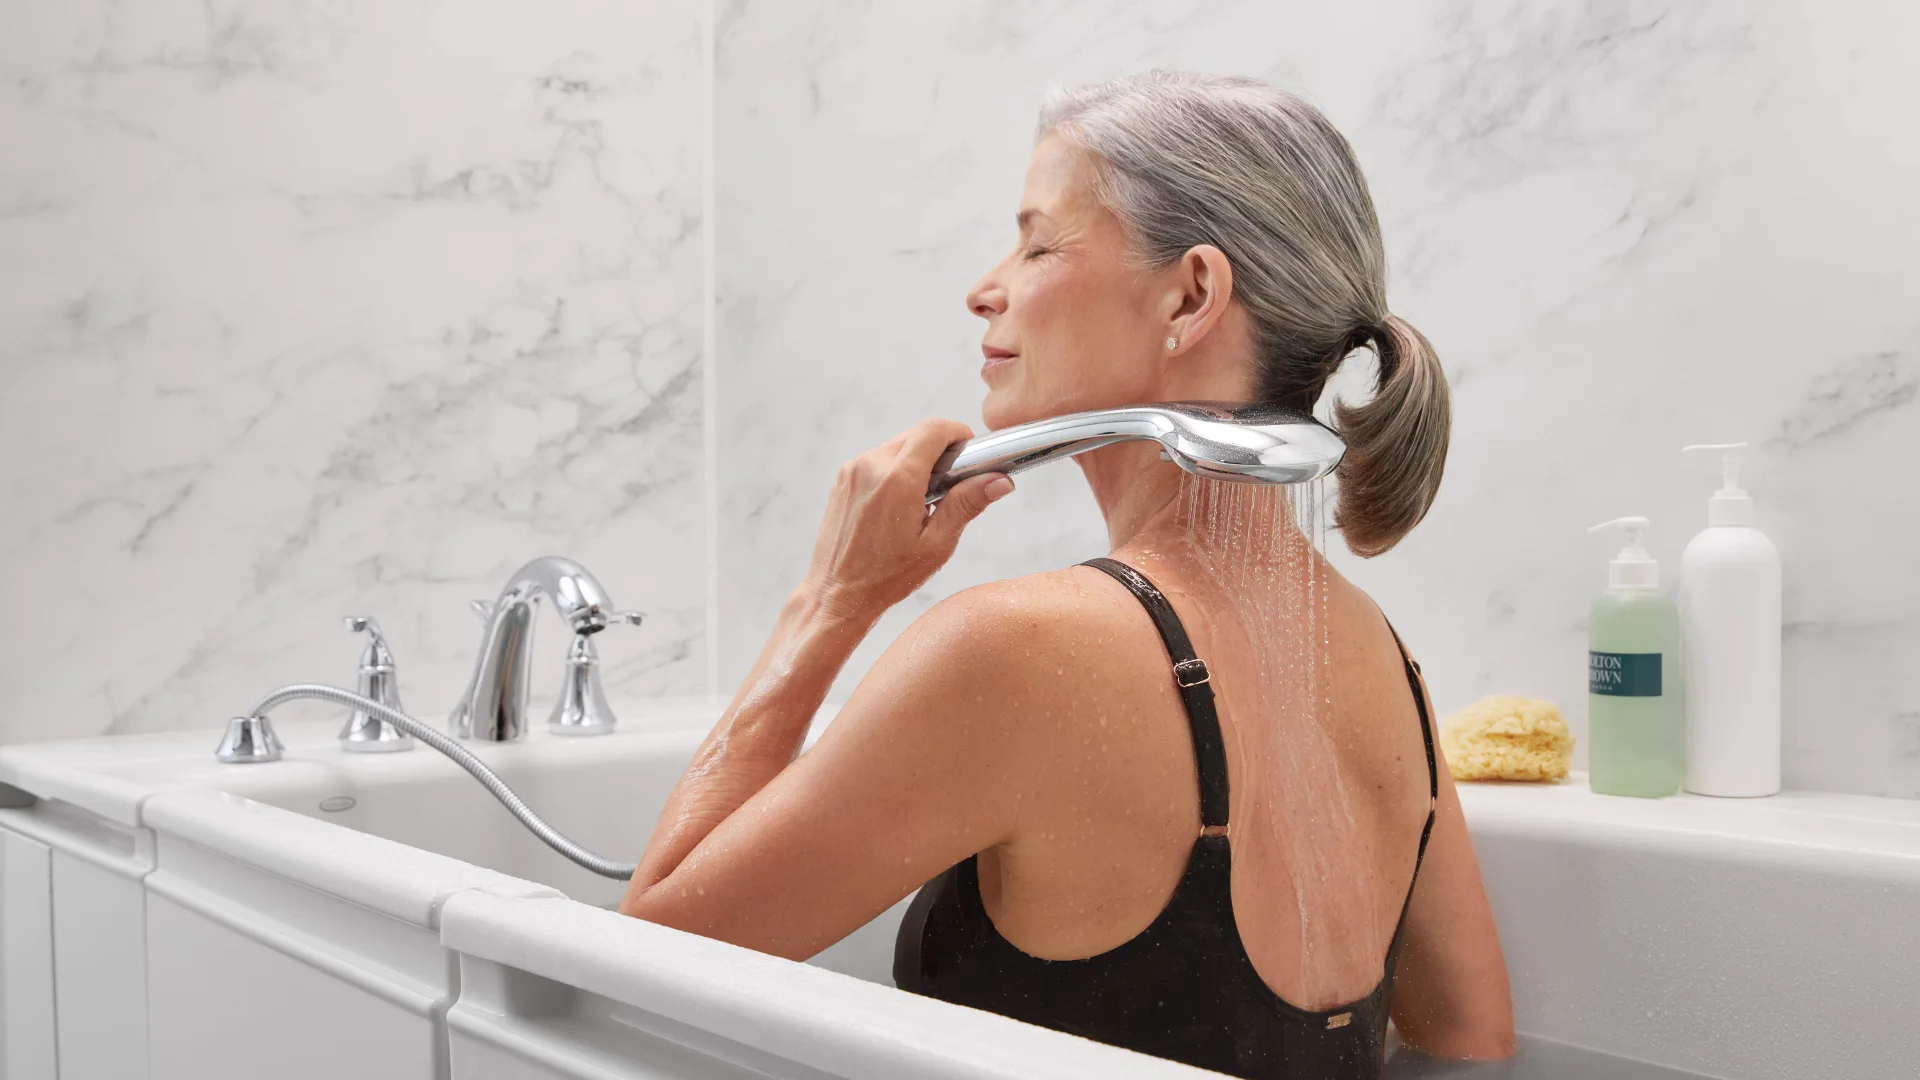 Efforest Bath Pillows for Tub Neck and Back Support